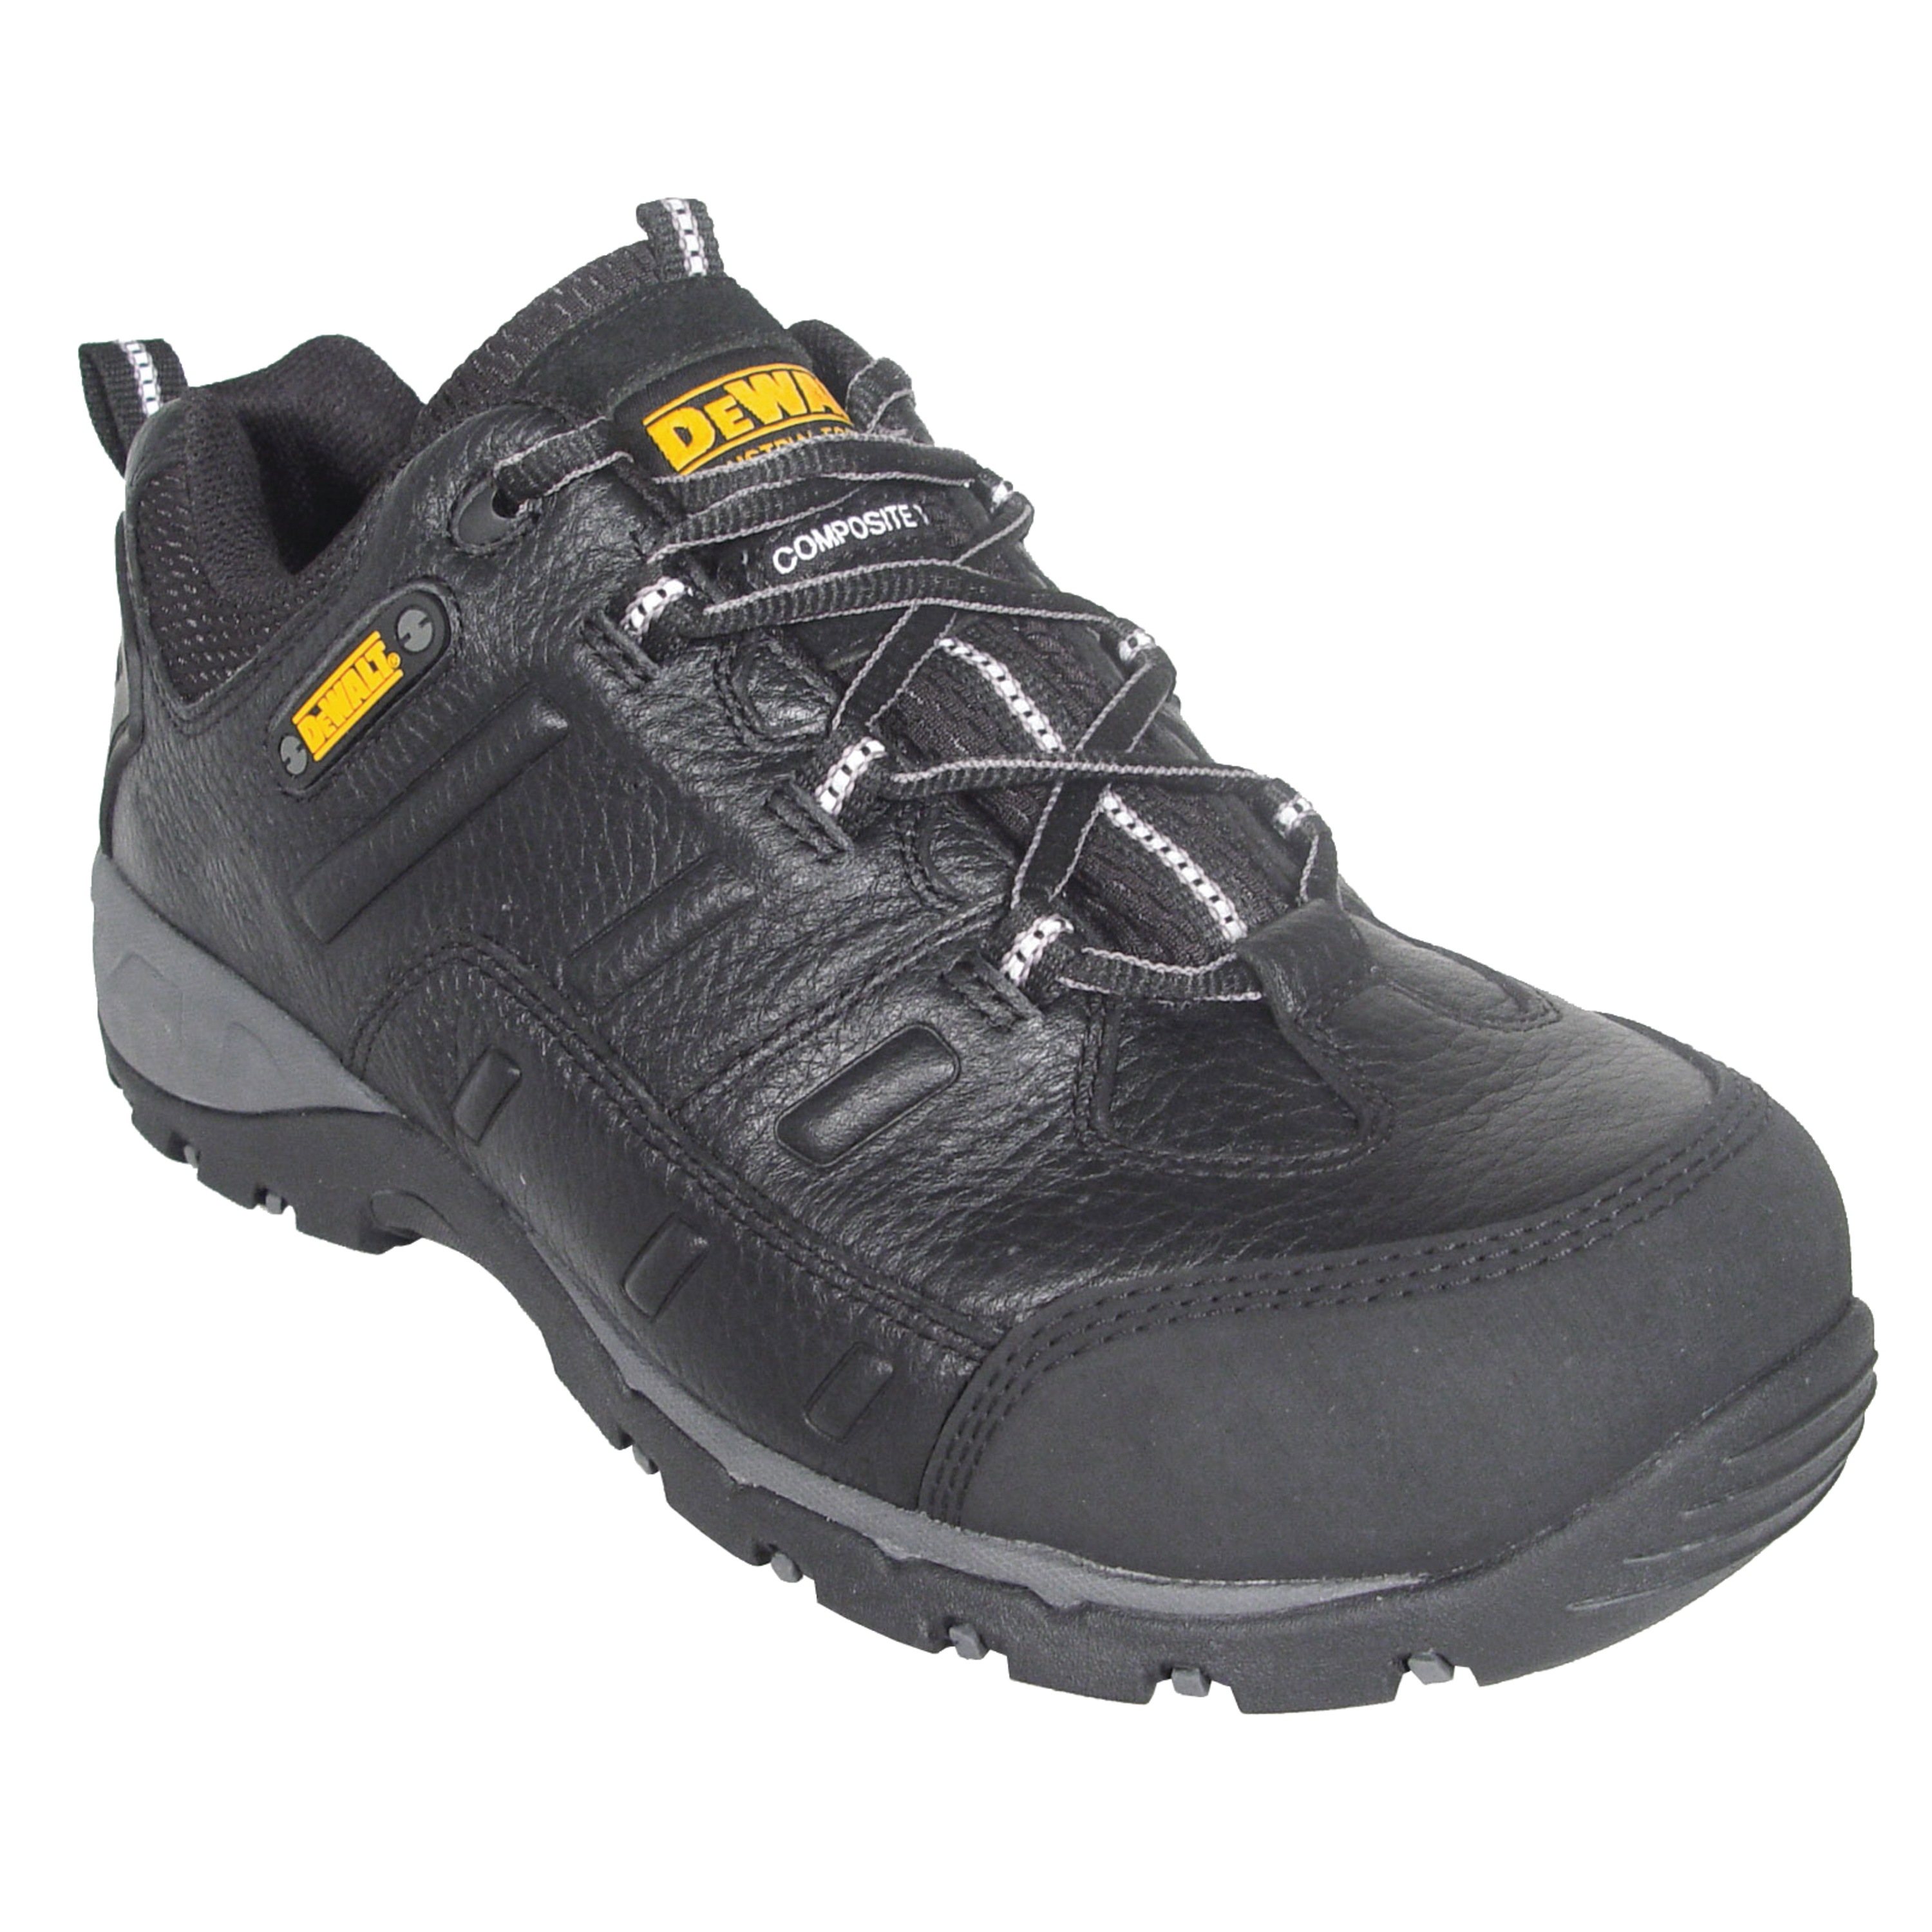 work boots with composite safety toe